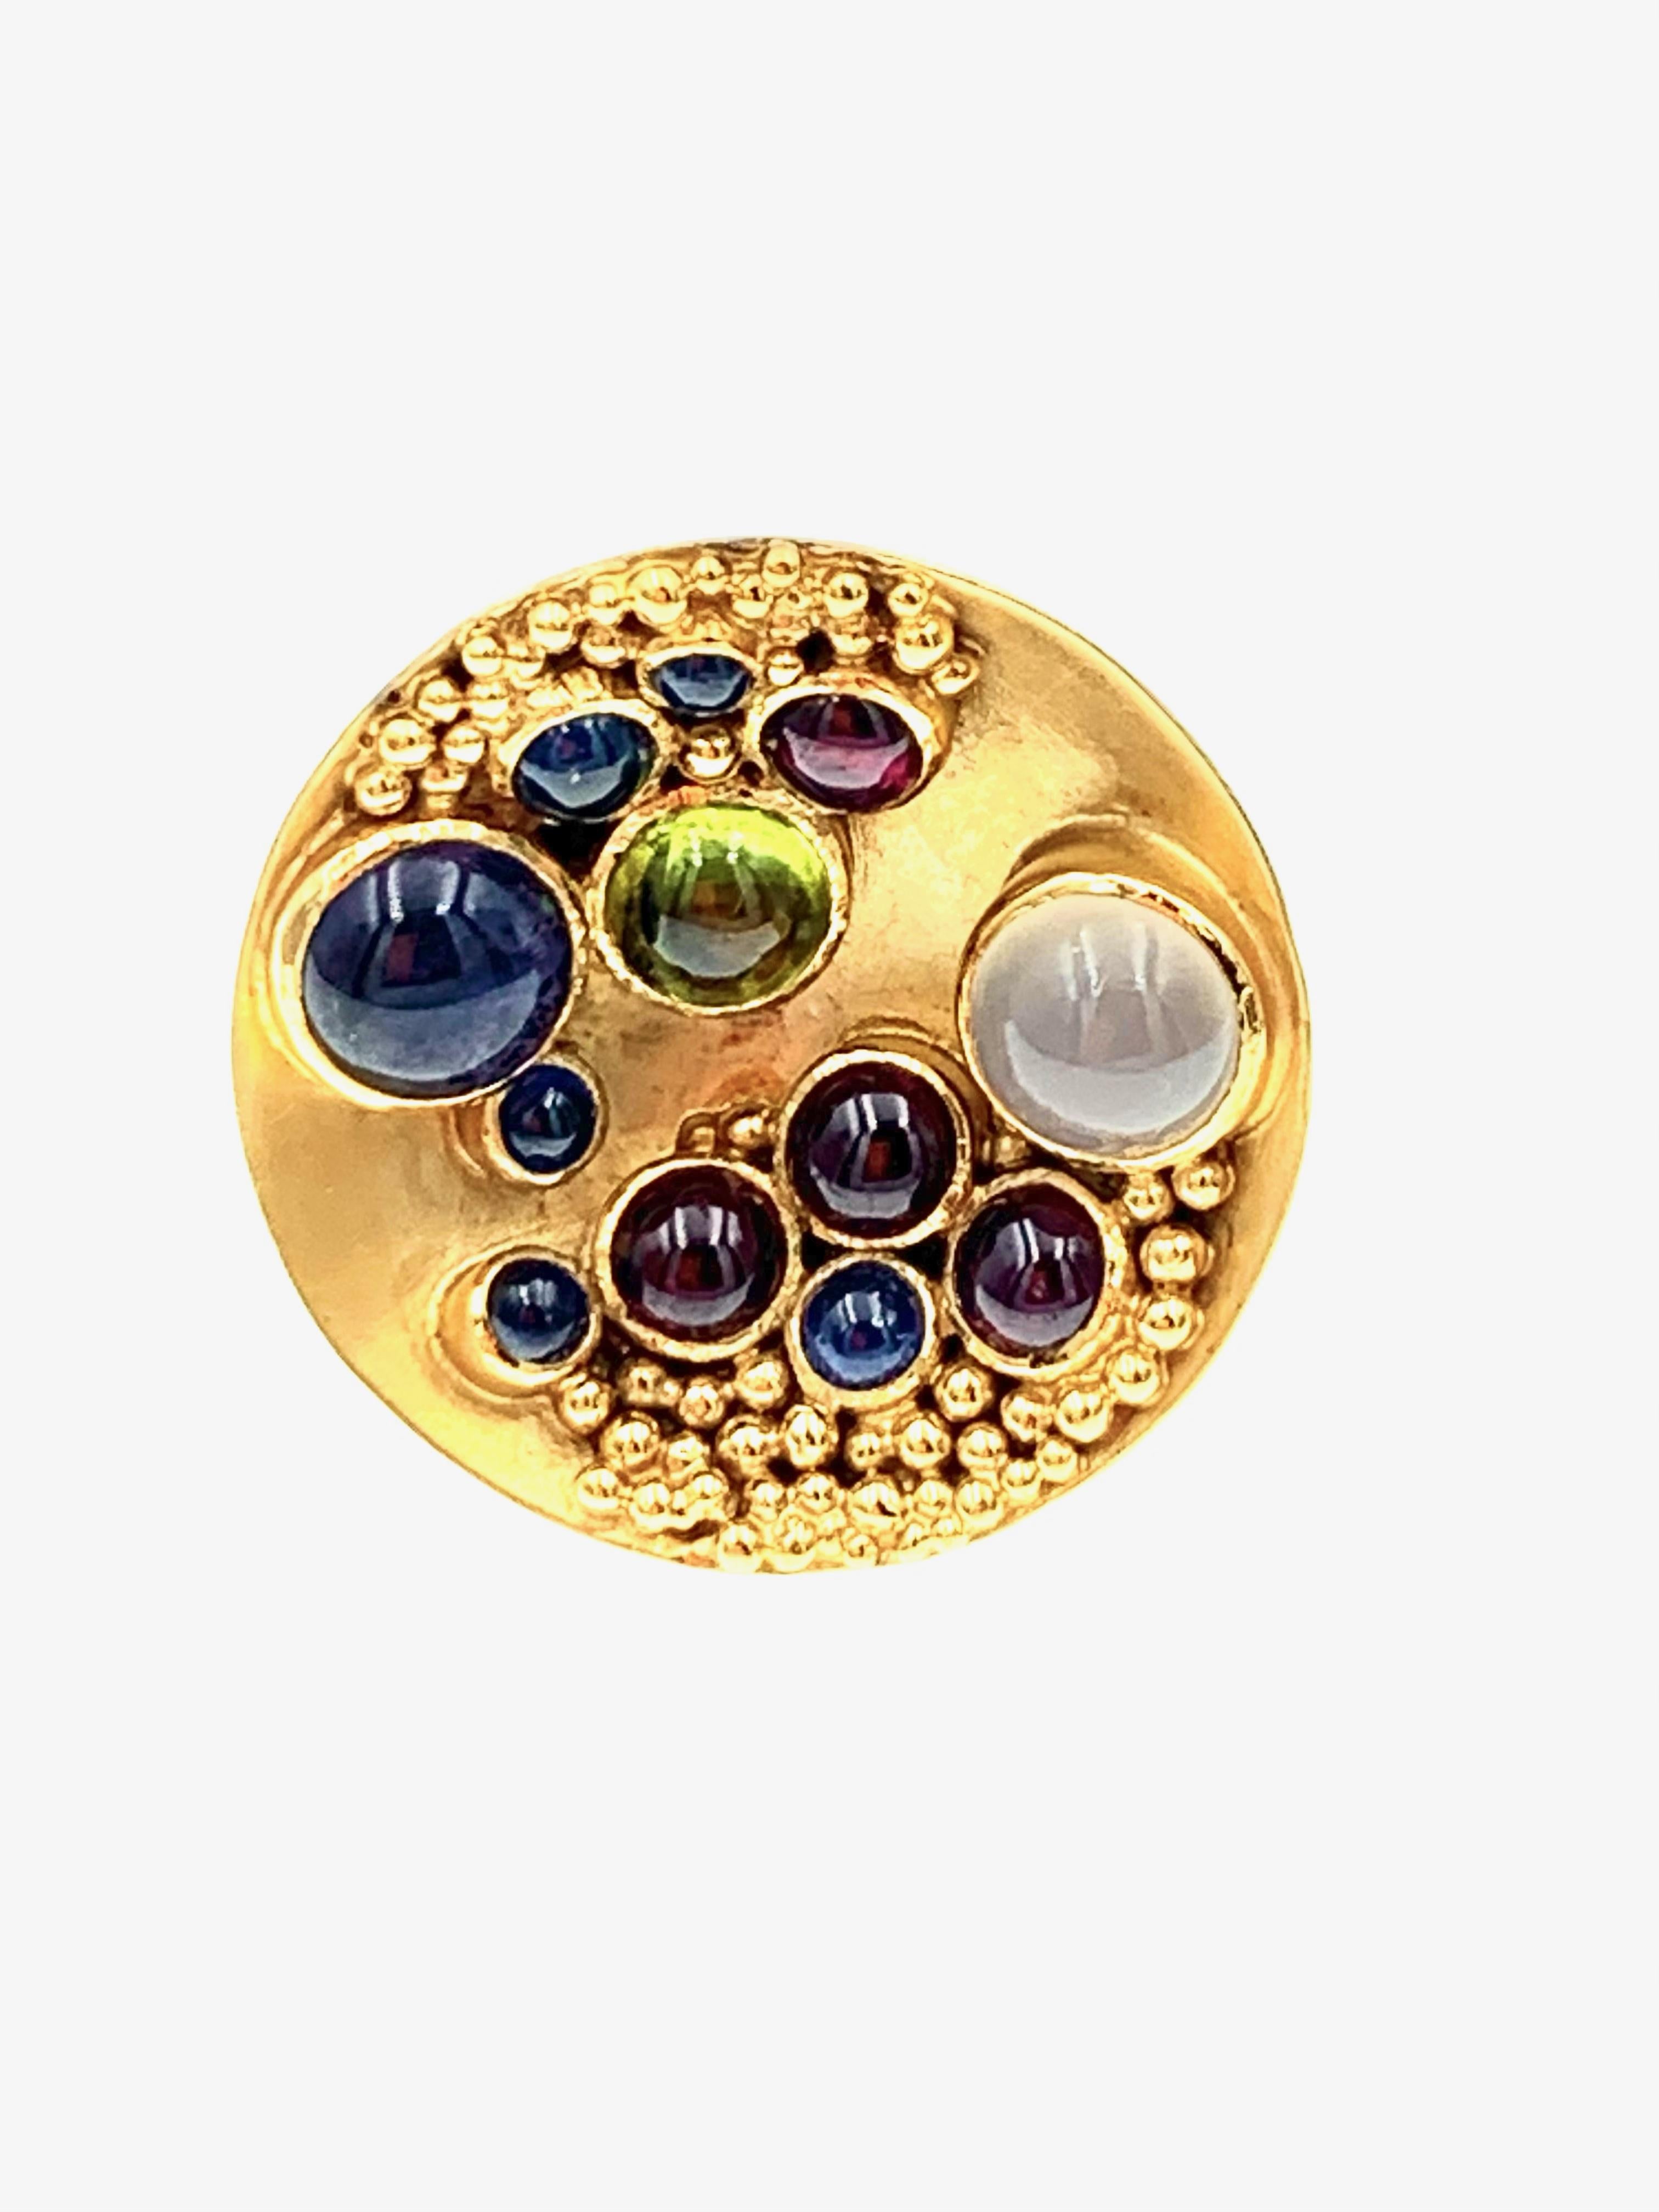 Hand made in 18 karat yellow gold with one Peridot cabochon, one Iolite cabochon, one Moonstone cabochon, 5 cabochon Blue Sapphires, 4 Rubelite cabachons and approximately 54 gold beads, in an inverted dome of brushed gold this ring is part of our